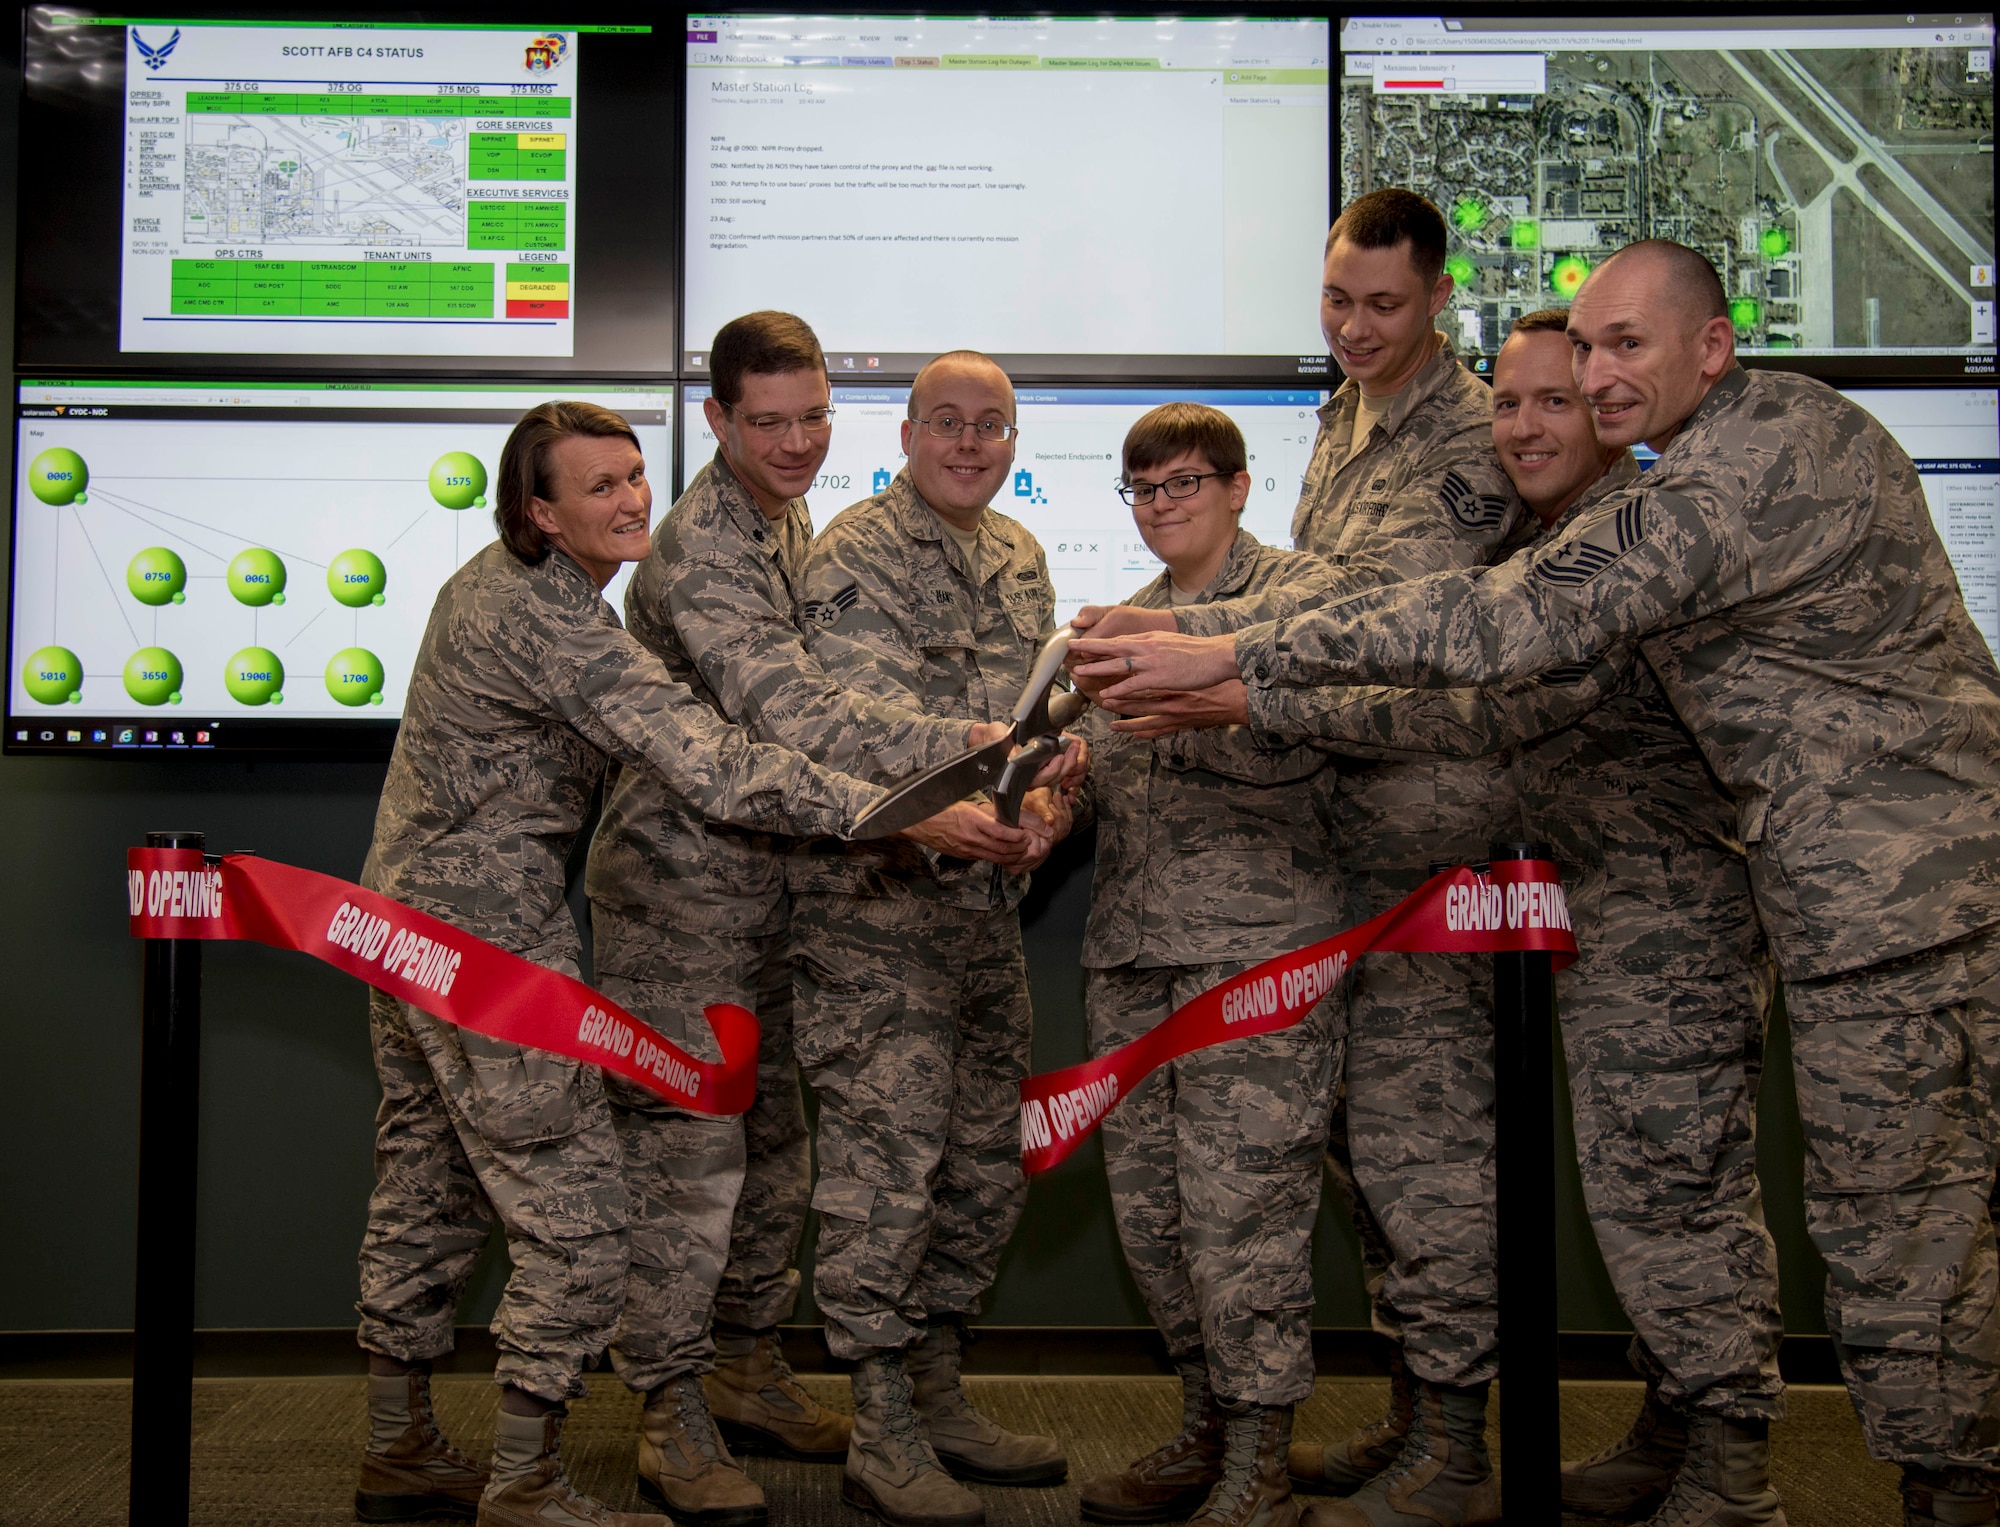 Col. Leslie Maher 375th Air Mobility Wing commander, and the official party cut the ribbon at the grand opening of the Cyber Operations Center, Aug. 23 2018 at Scott Air Force Base, Ill. The CyOC will act as a centralized reporting agency for over 14,000 users on Scott AFB, including it’s vital mission partners.